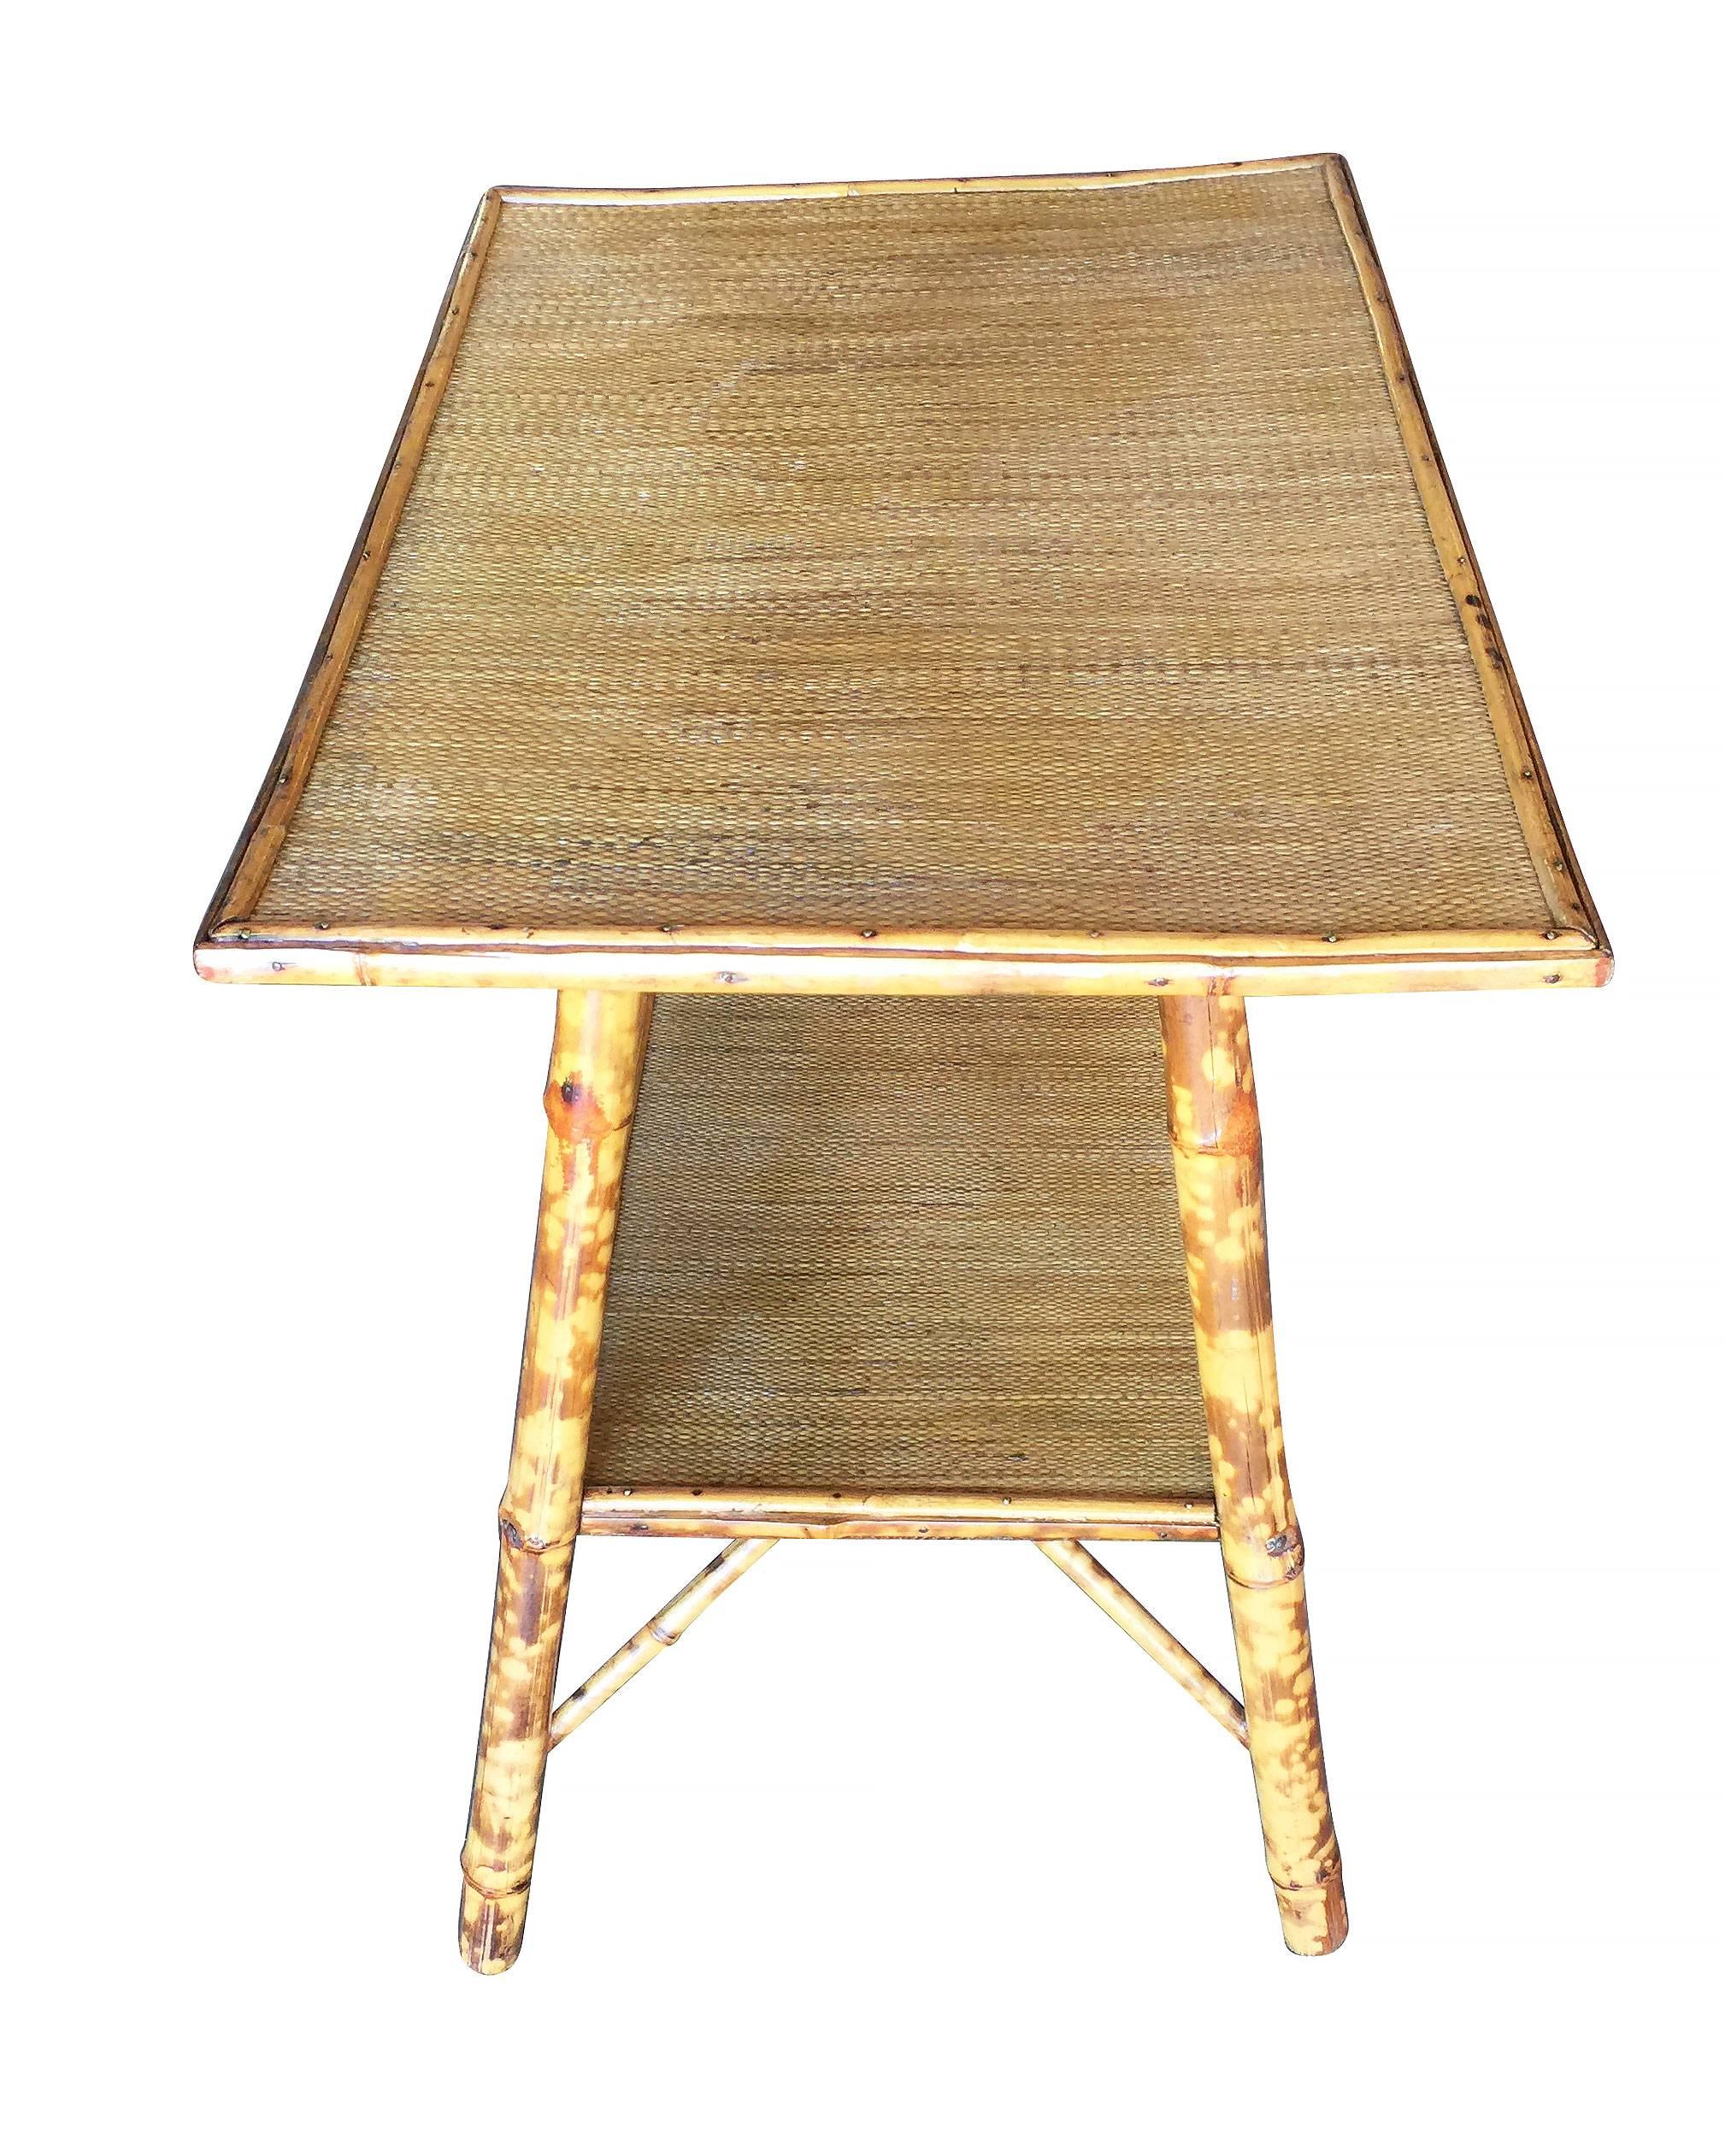 Pedestal Side Table with Tiger Bamboo Frame with Bottom Shelf 2